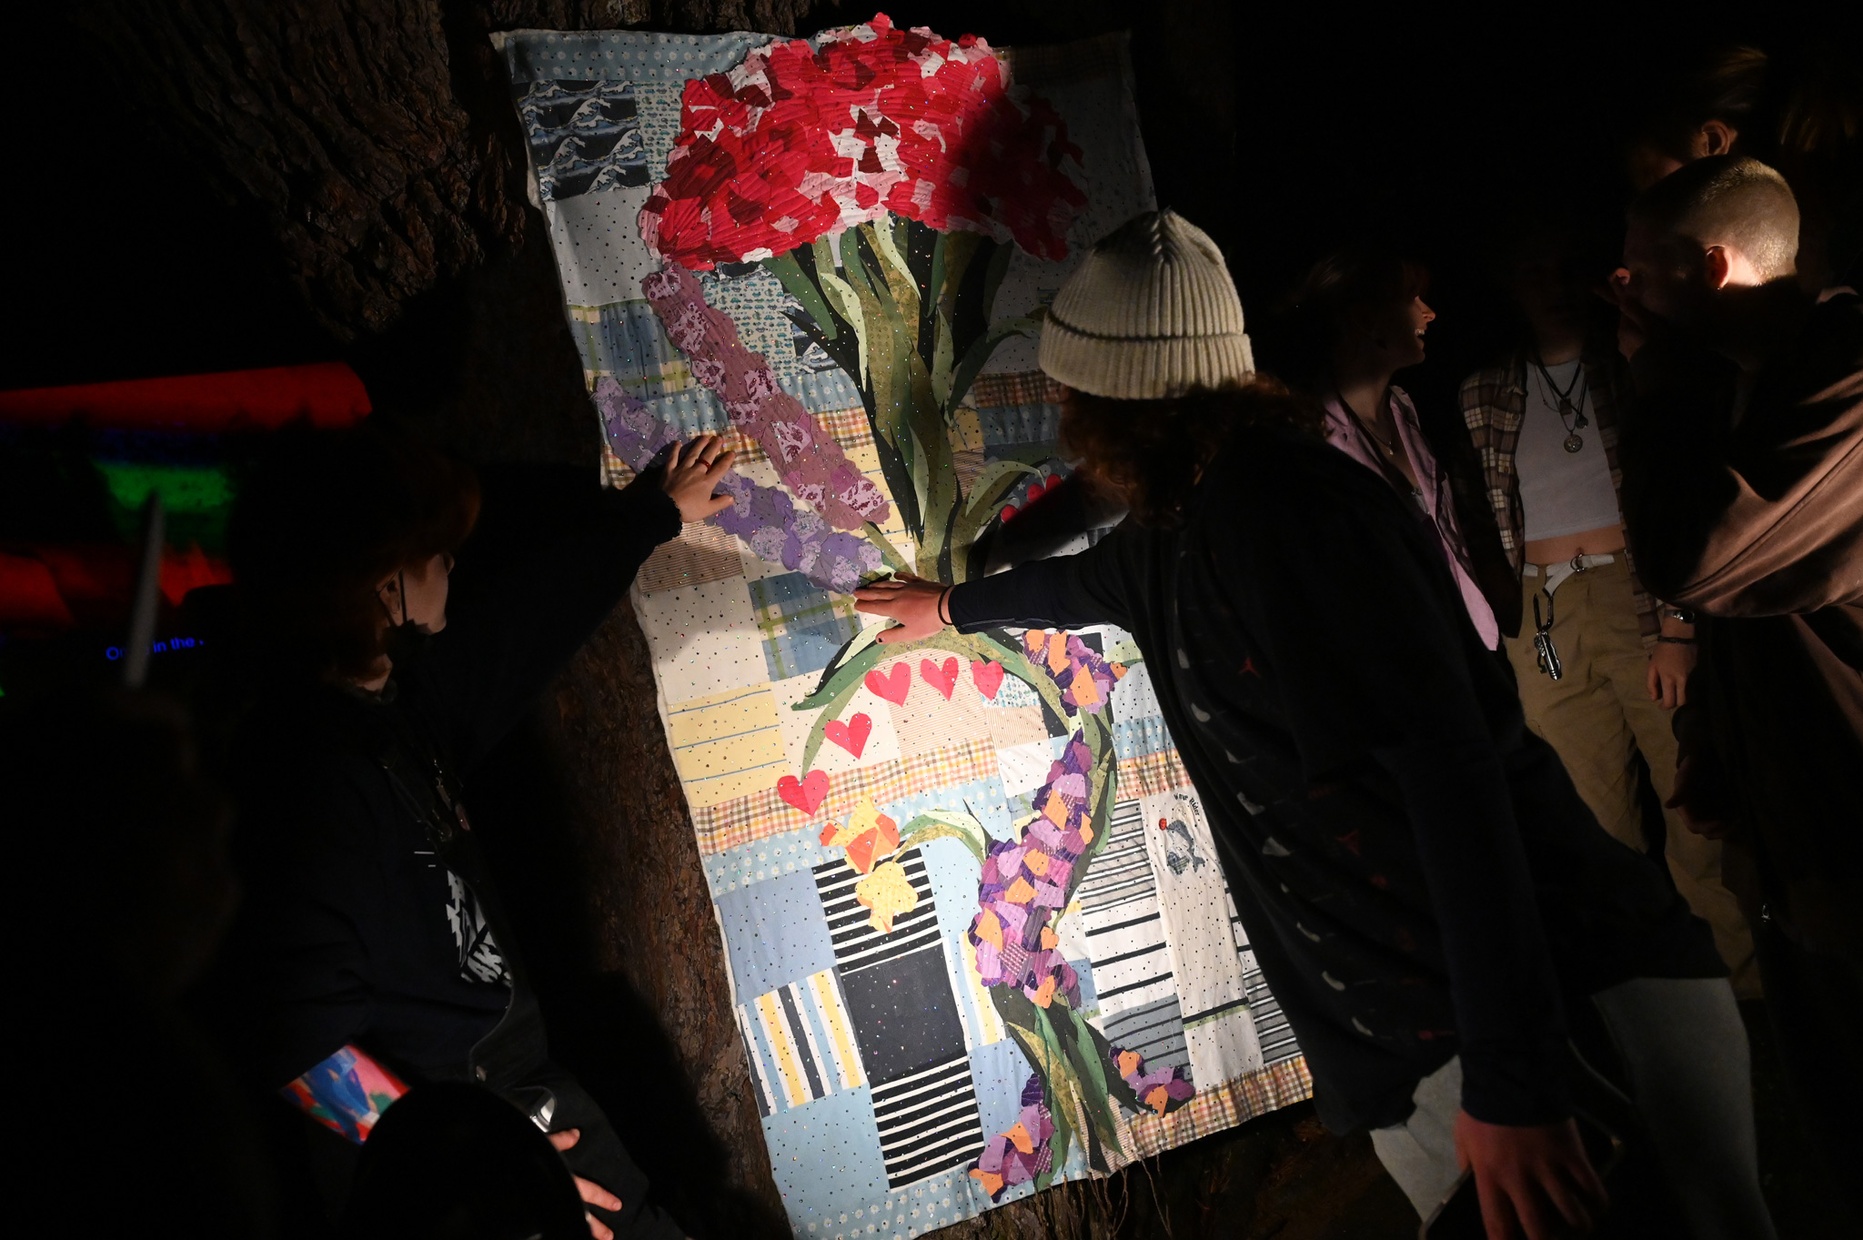 In the dark, people gather around to touch a quilt lit by spotlights.